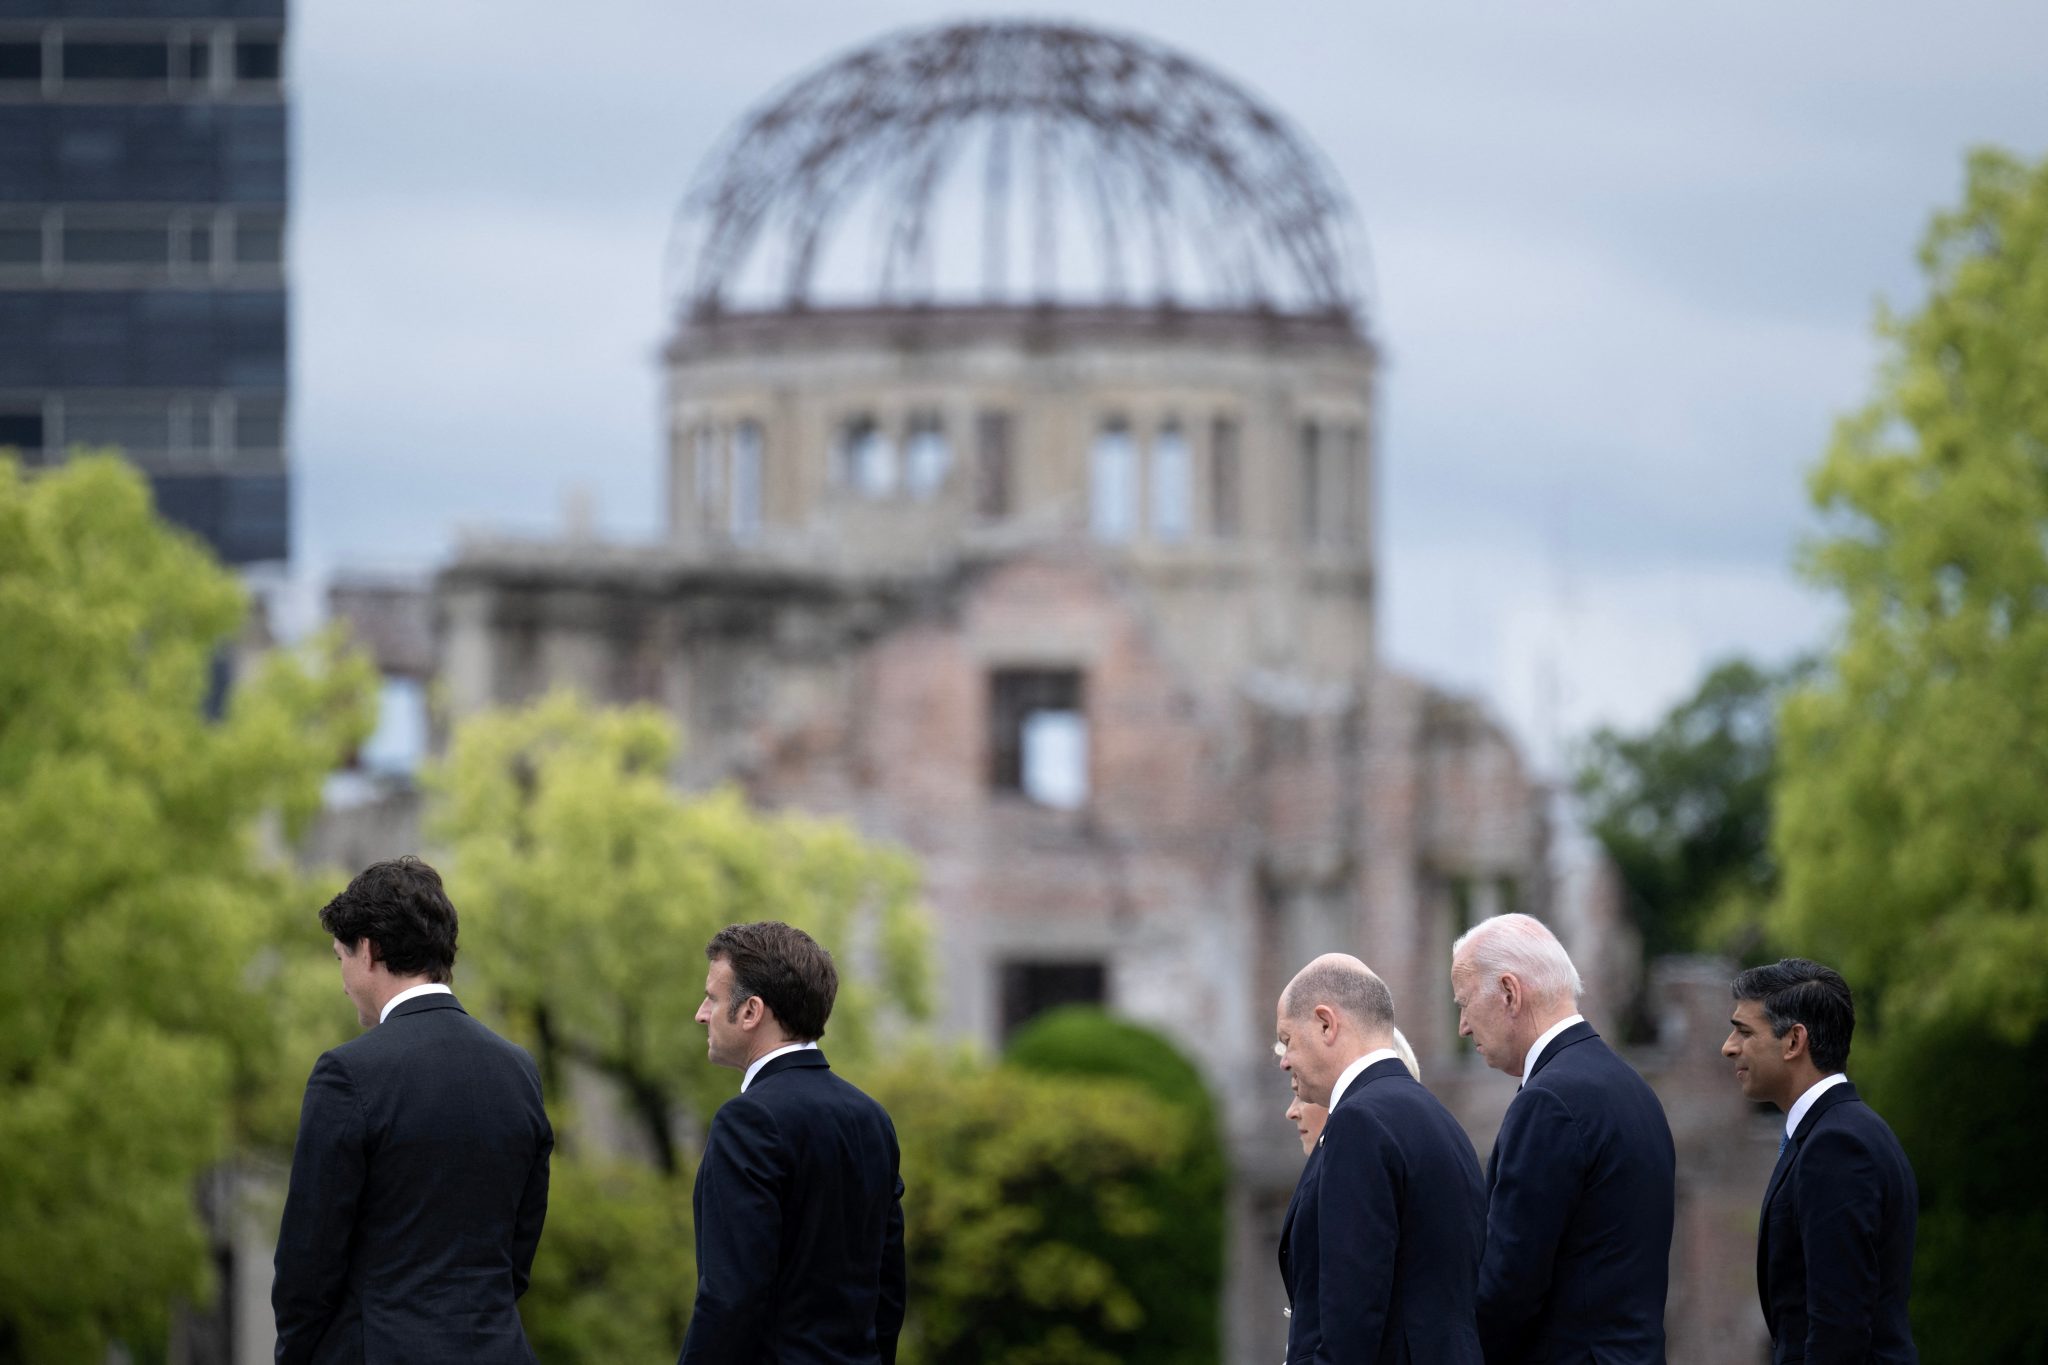 Japan’s nuclear dilemmas in a challenging new era